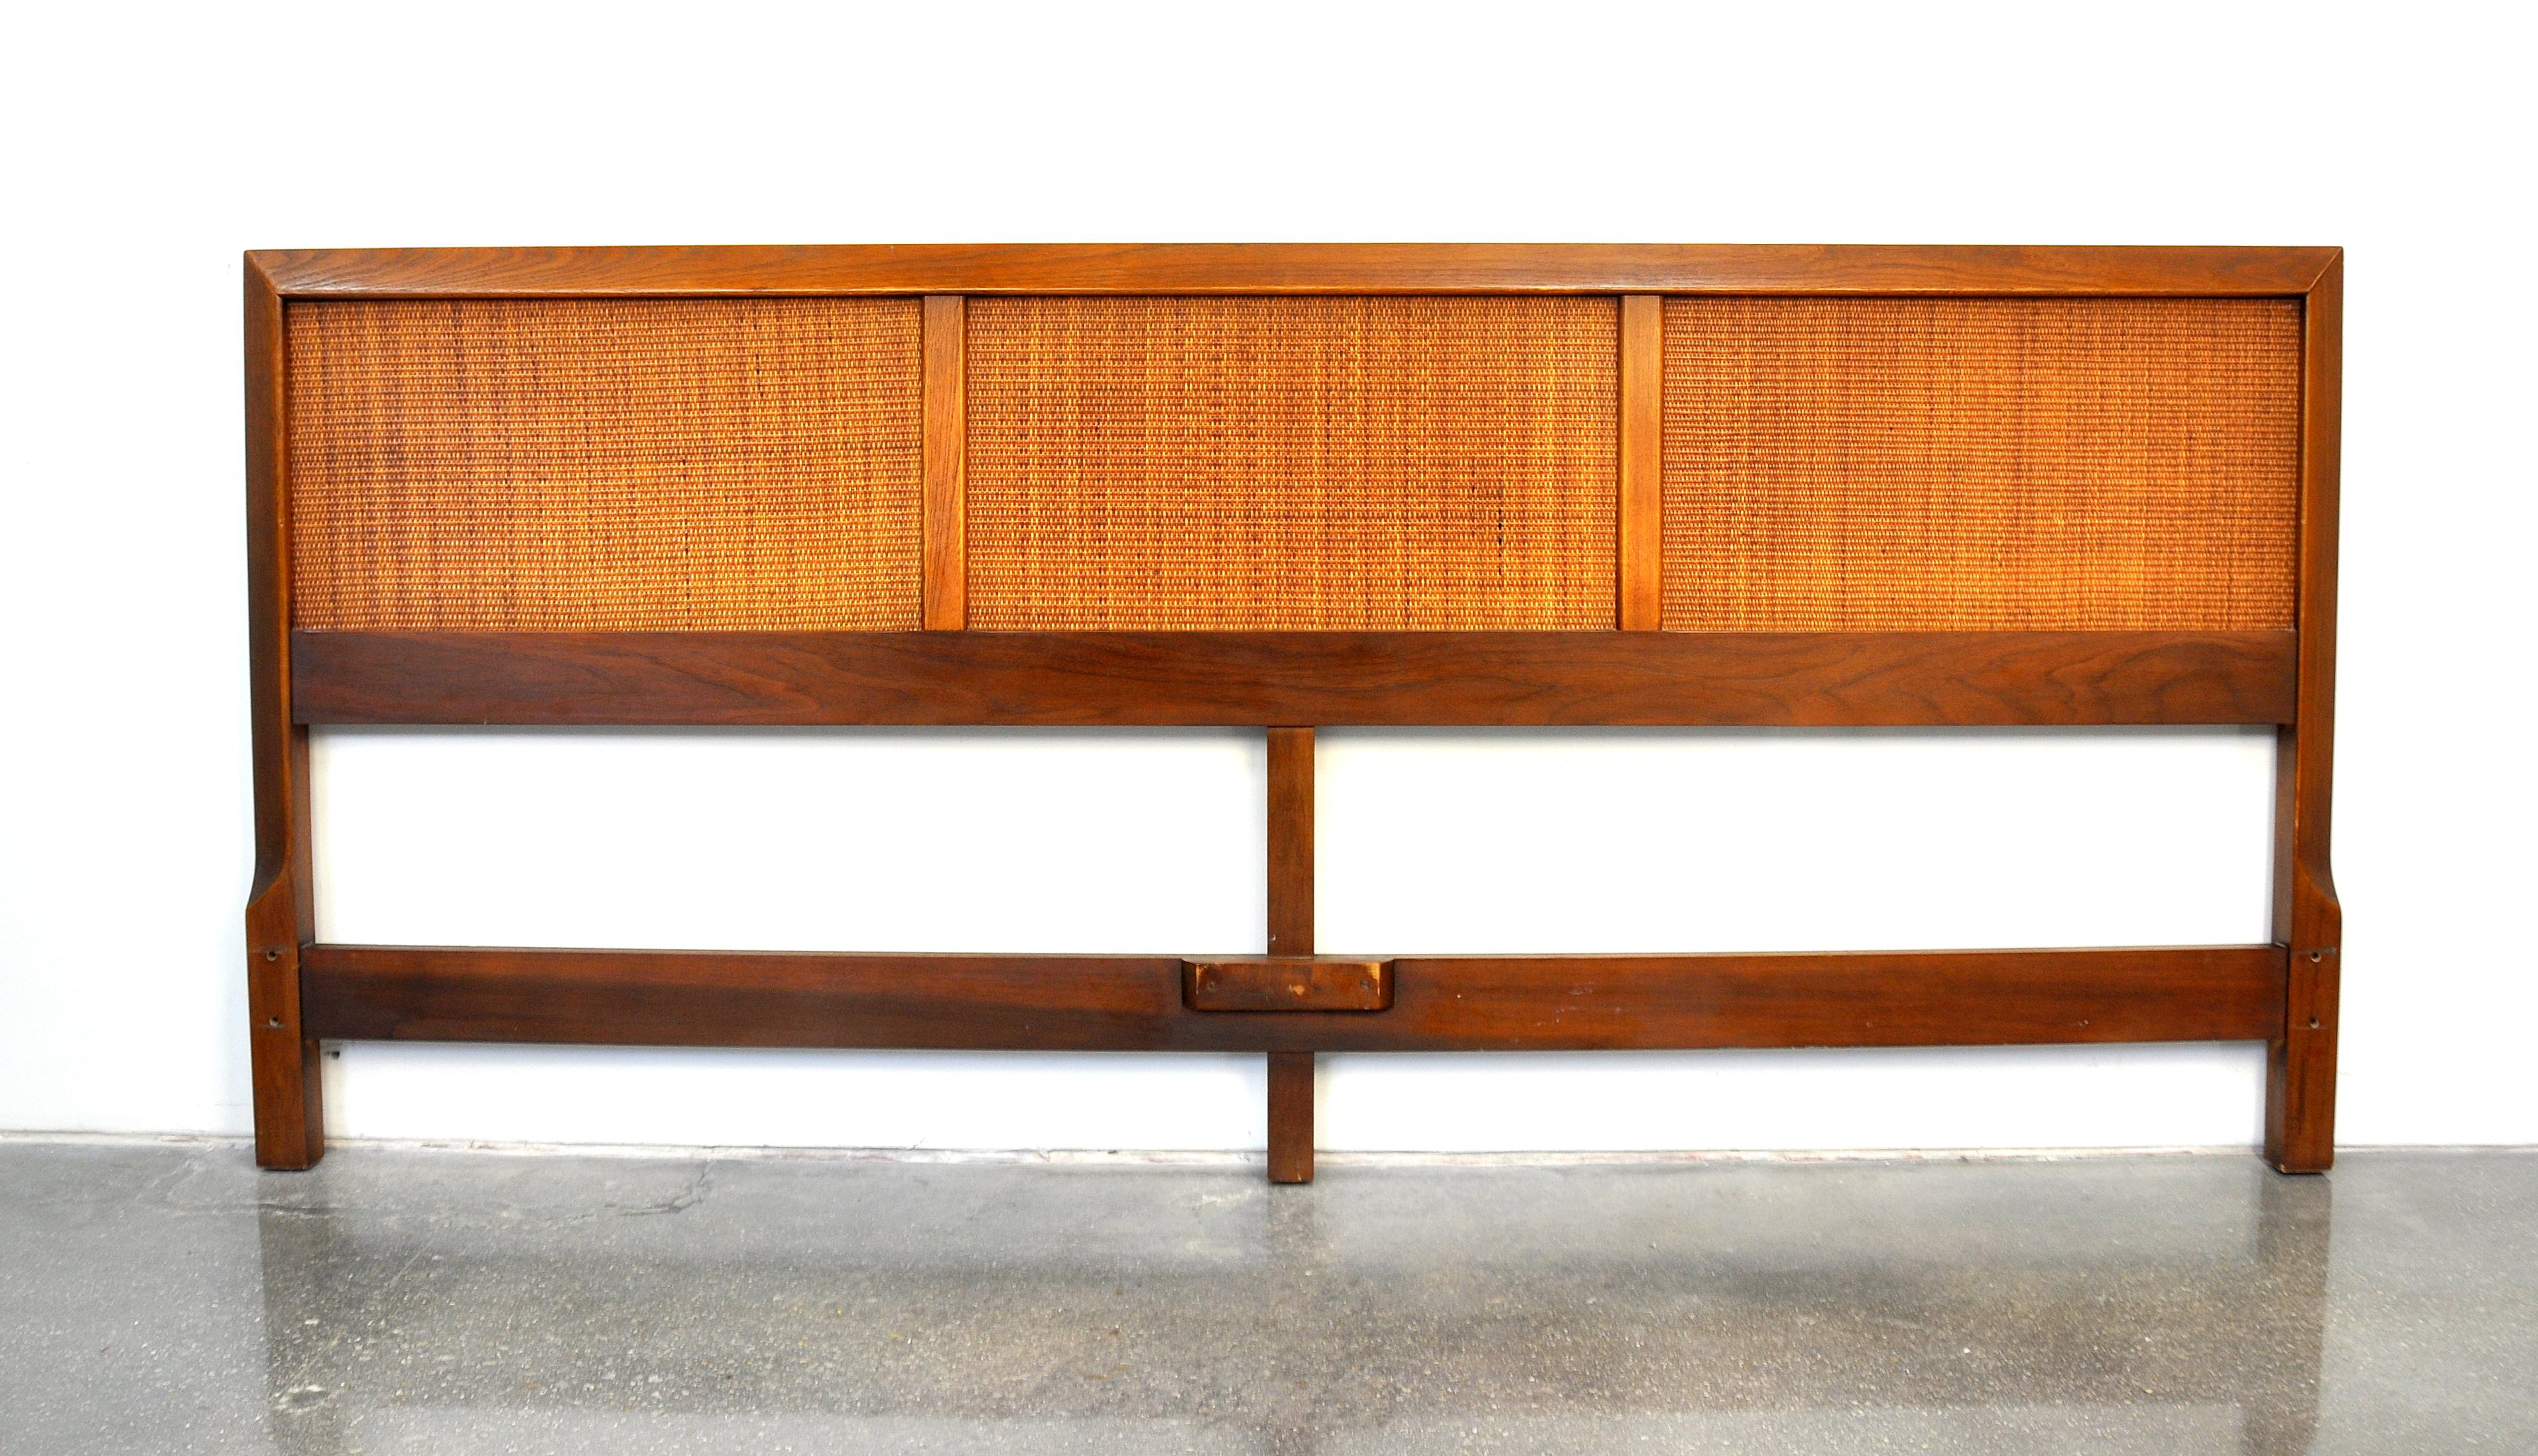 A vintage Mid-Century Modern king-size walnut headboard from the desirable Accord line manufactured by American of Martinsville in the 1960s. The bed features caned panels and a solid walnut frame.